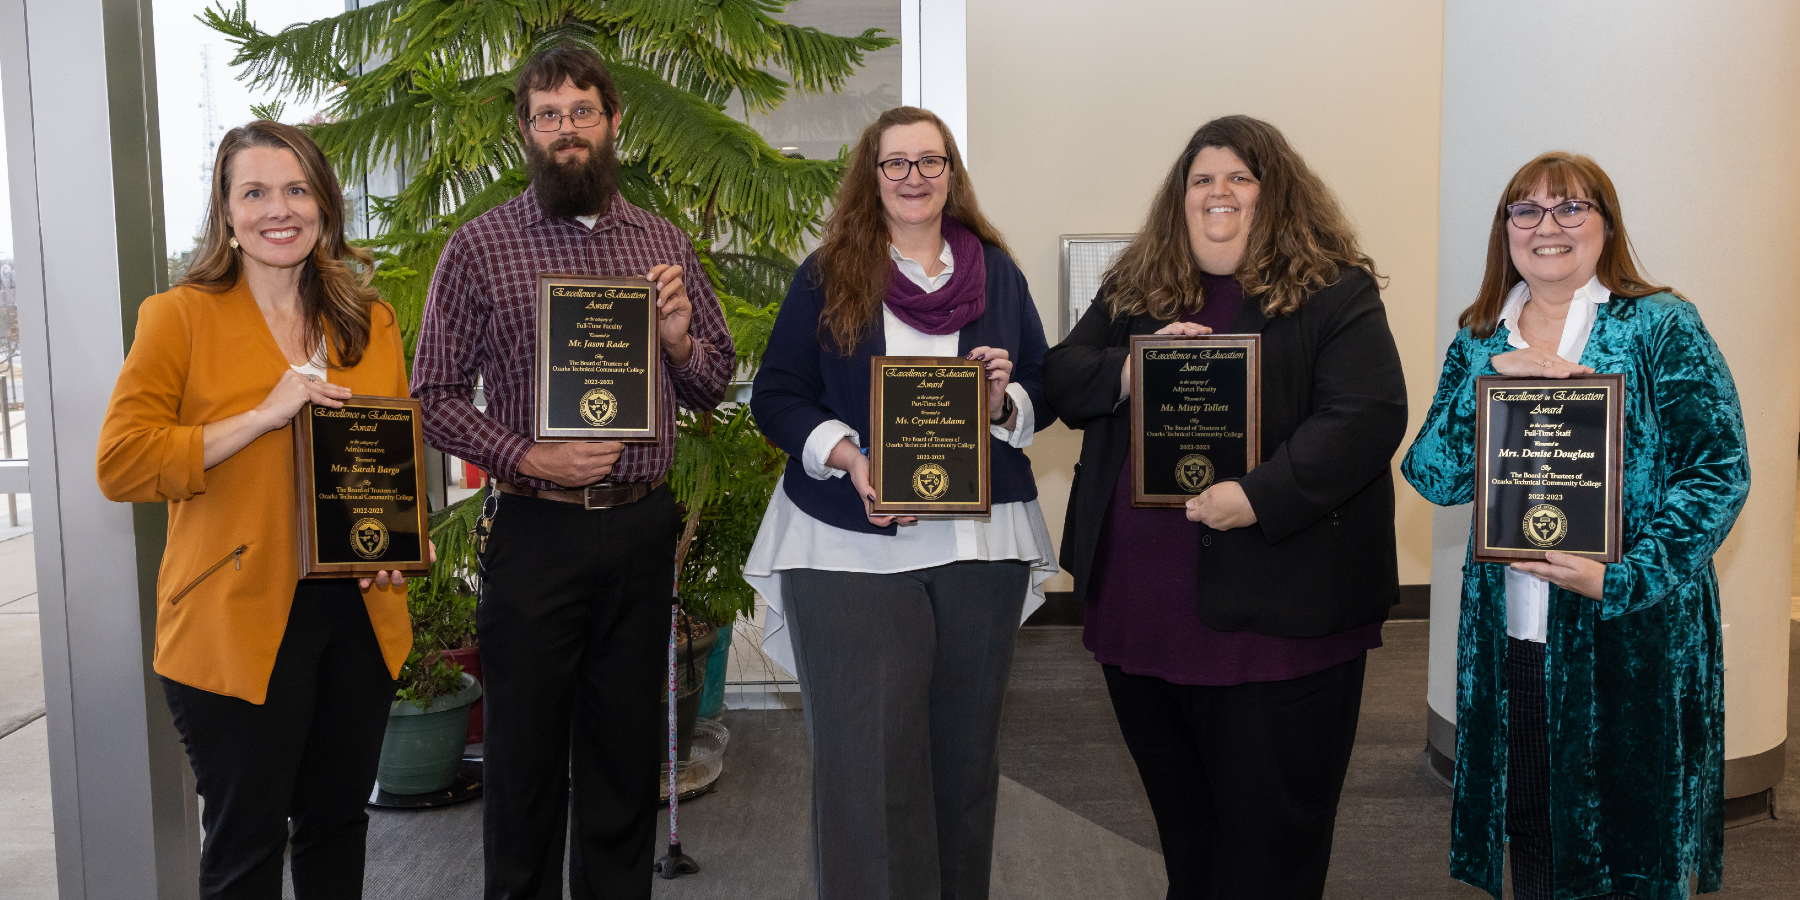 Excellence in education award winners